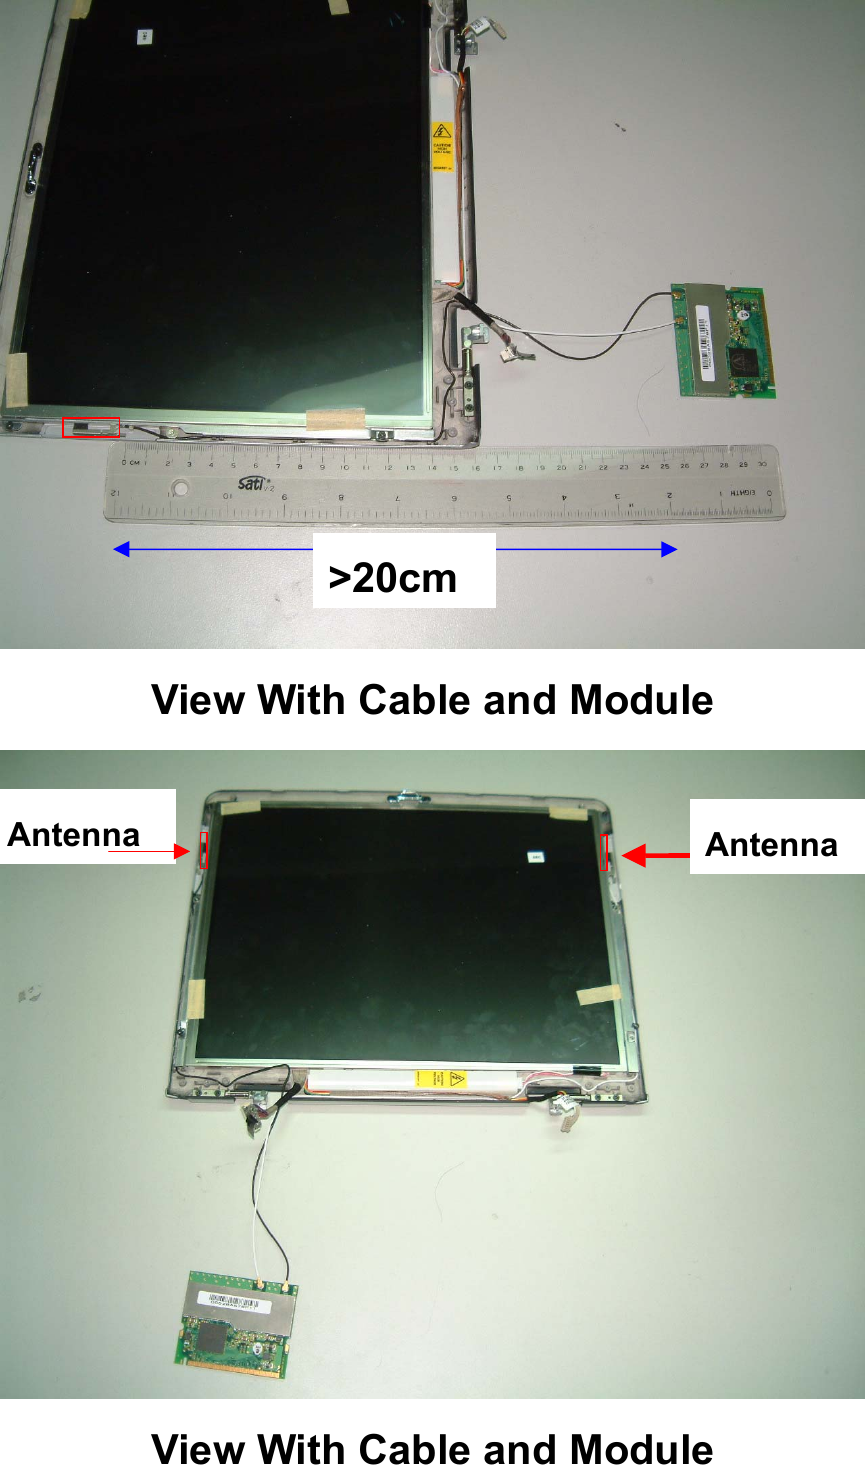 View With Cable and ModuleView With Cable and Module&gt;20cmAntennaAntenna